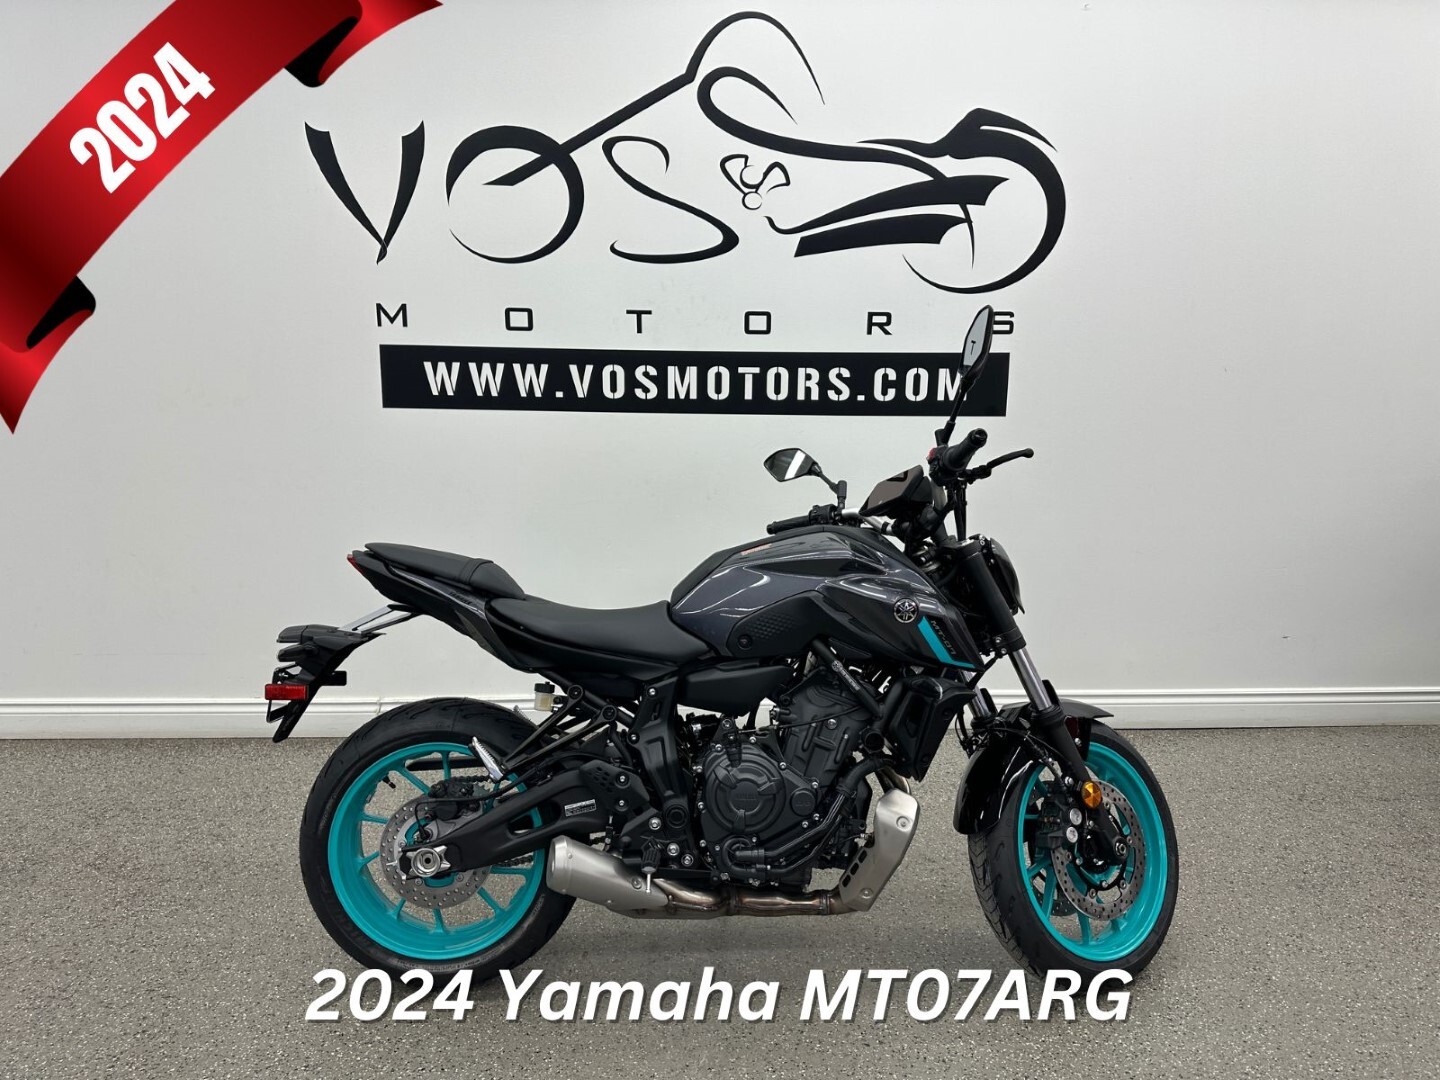 2024 Yamaha MT07ARG MT07ARG - V6015NP - -No Payments for 1 Year**